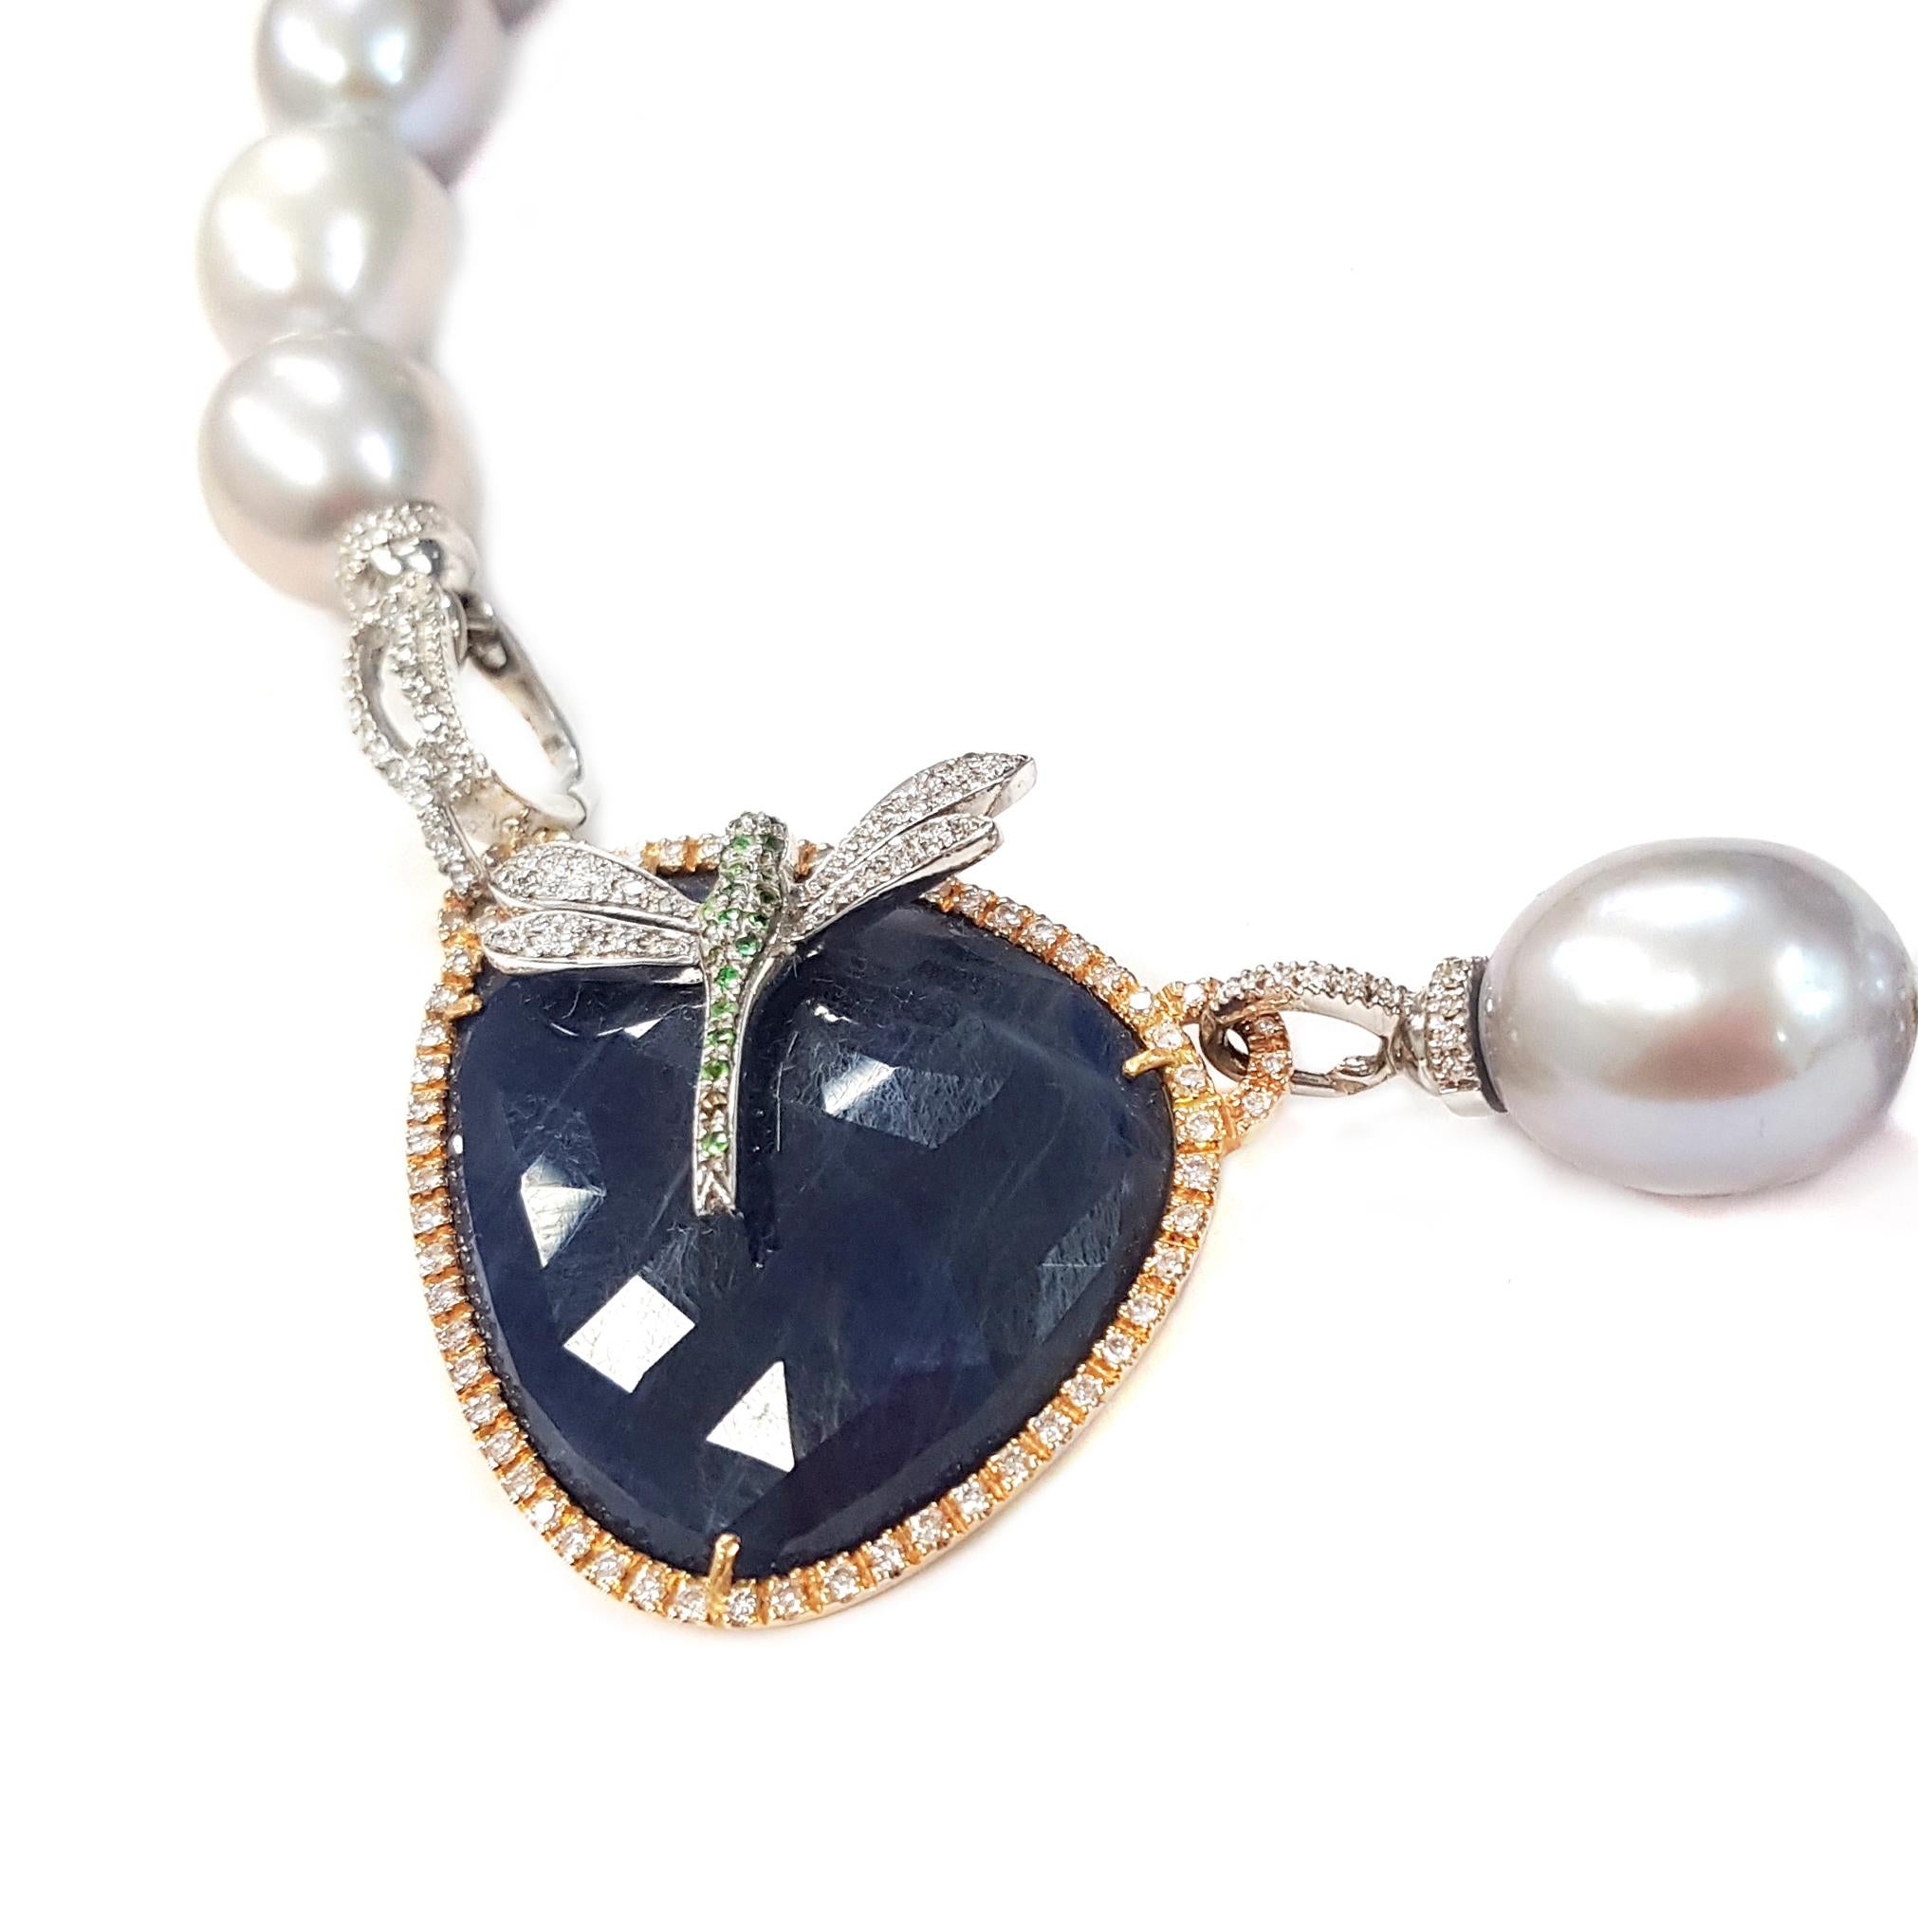 A gorgeous necklace of large silvery freshwater pearls, each about 1 centimetre in diameter, is completed by a large blue sapphire pendant. The pendant is framed with 18-karate rose gold and set with white diamonds. It supports a dainty white